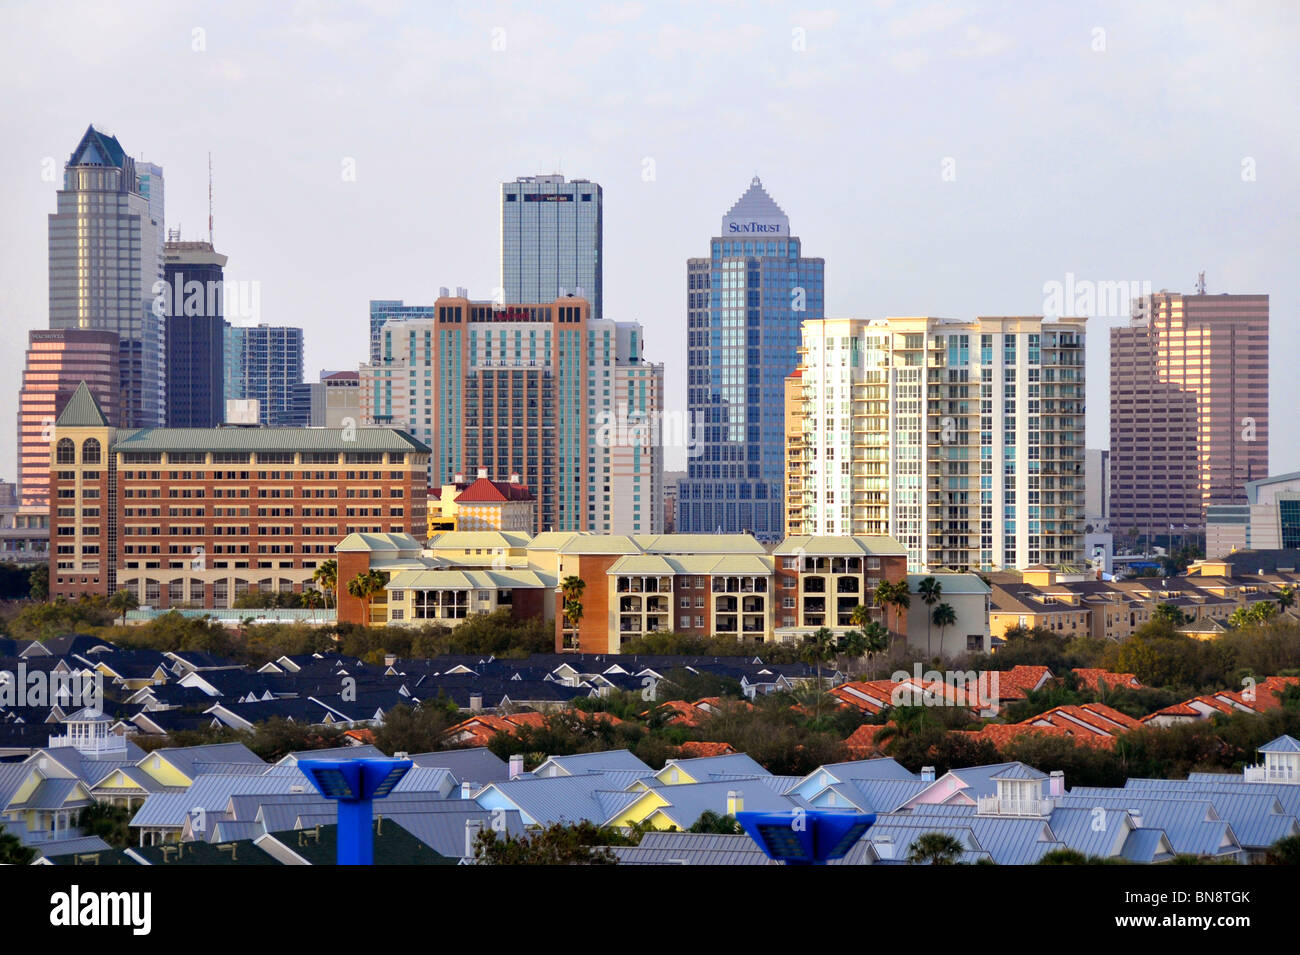 Downtown Tampa Florida Skyline with Residential Homes Stock Photo